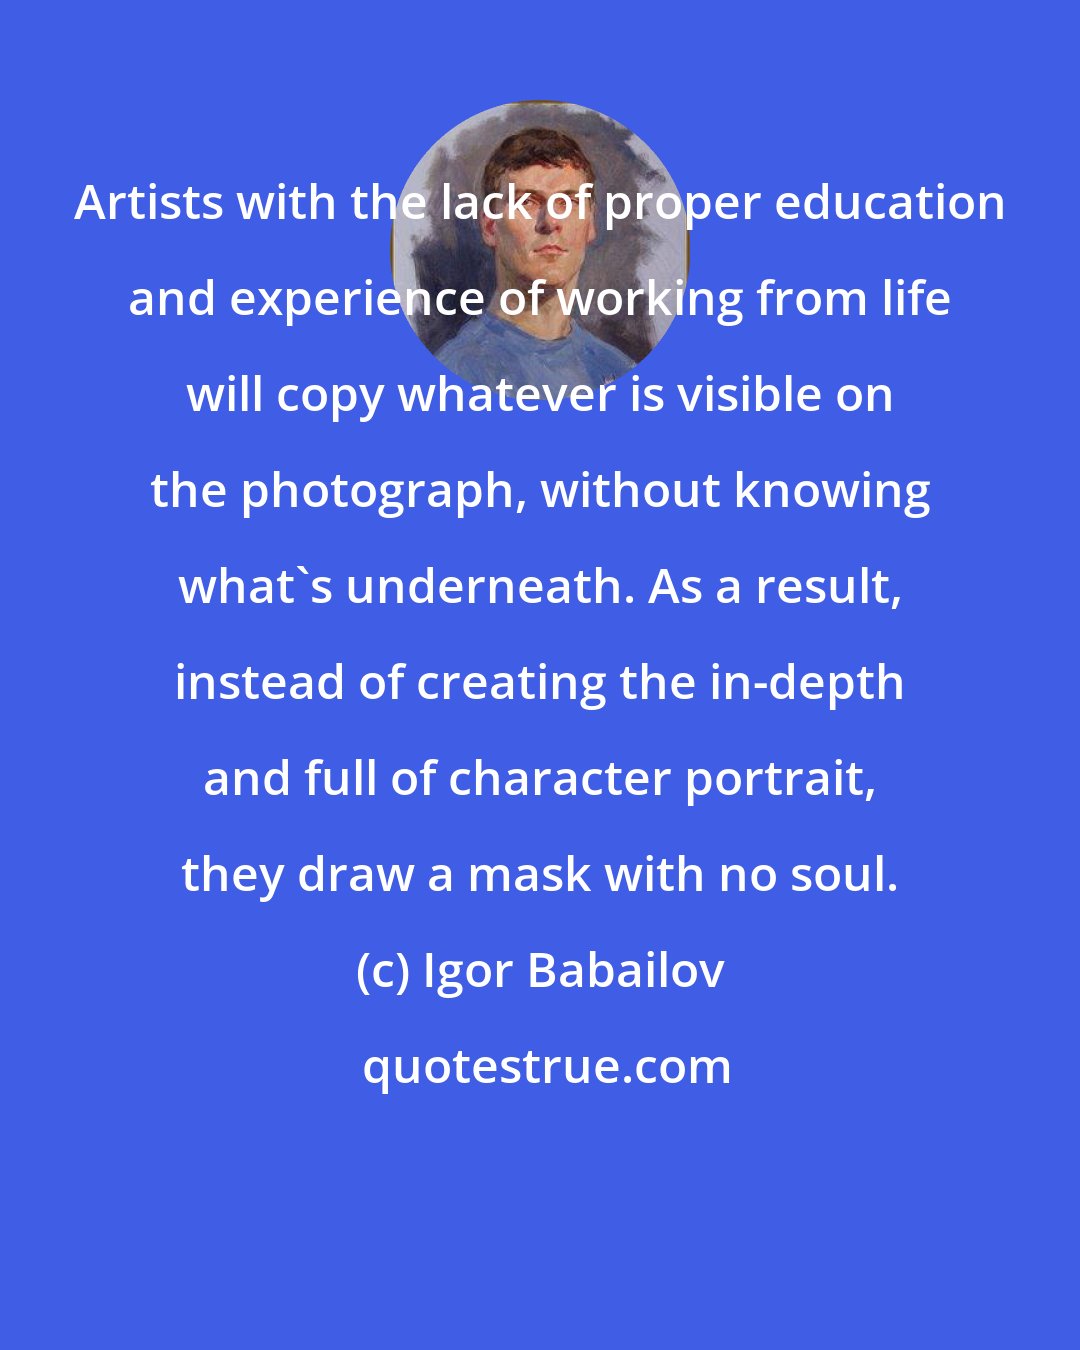 Igor Babailov: Artists with the lack of proper education and experience of working from life will copy whatever is visible on the photograph, without knowing what's underneath. As a result, instead of creating the in-depth and full of character portrait, they draw a mask with no soul.